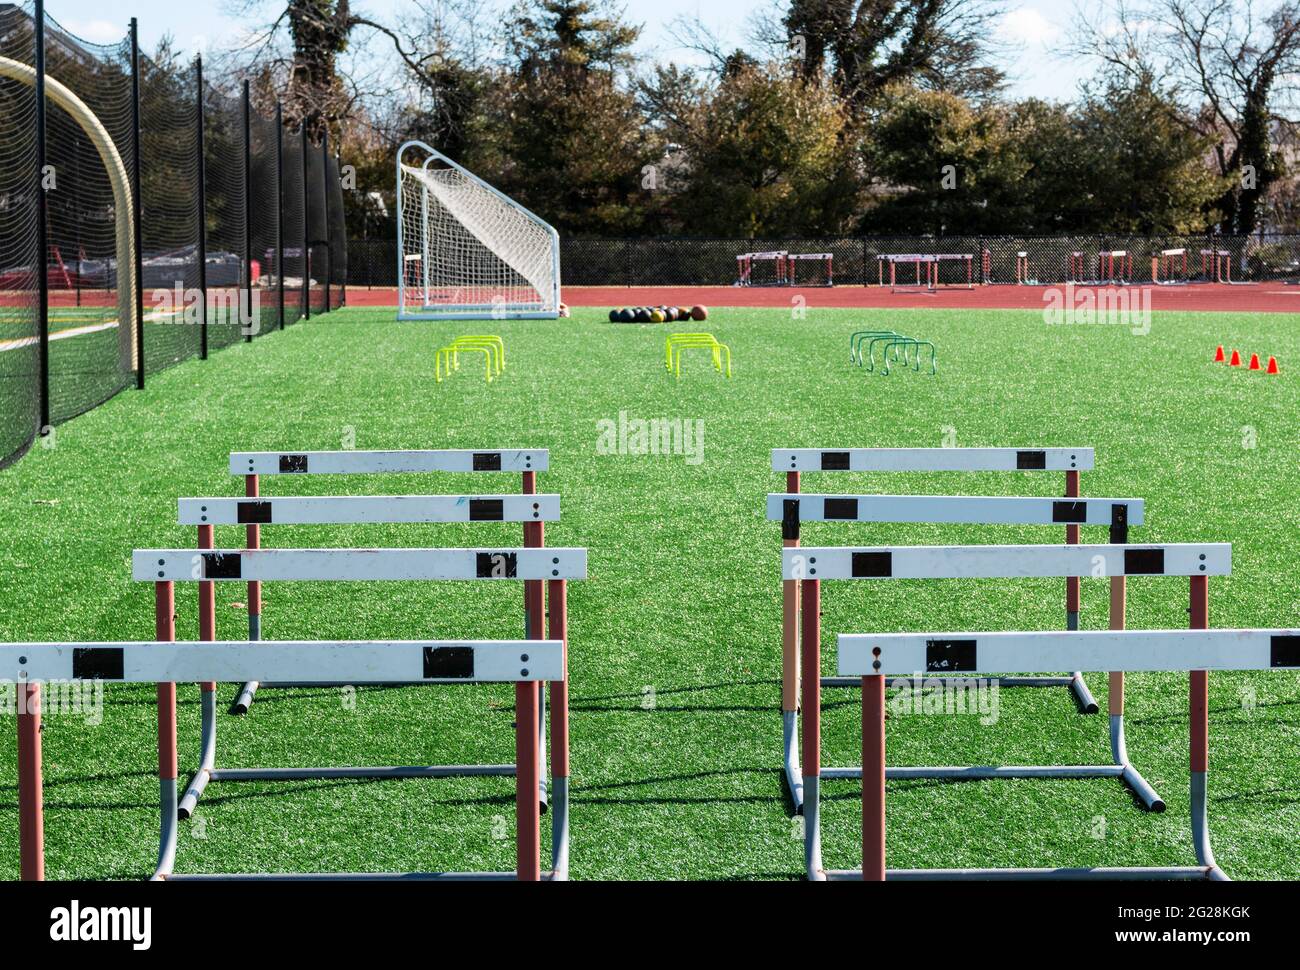 Track hurdles, mini hurdles medicine balls and orange cones set up on a green turf field for track and field strength and agility practice. Stock Photo